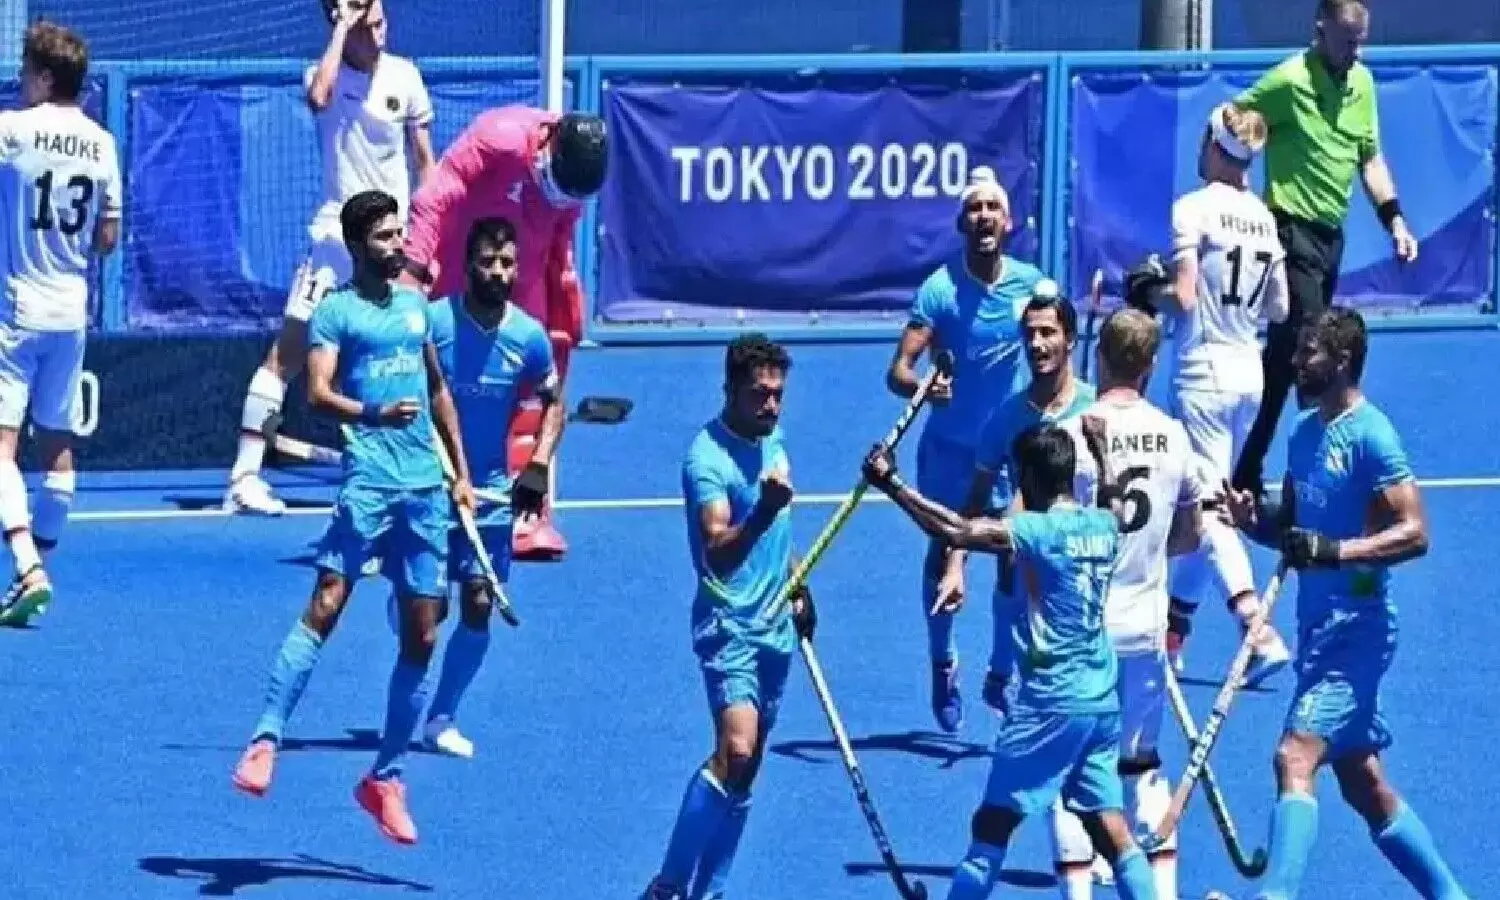 Indian Hockey Team defeated Germany to win the Bronze Medal in the Tokyo Olympics.